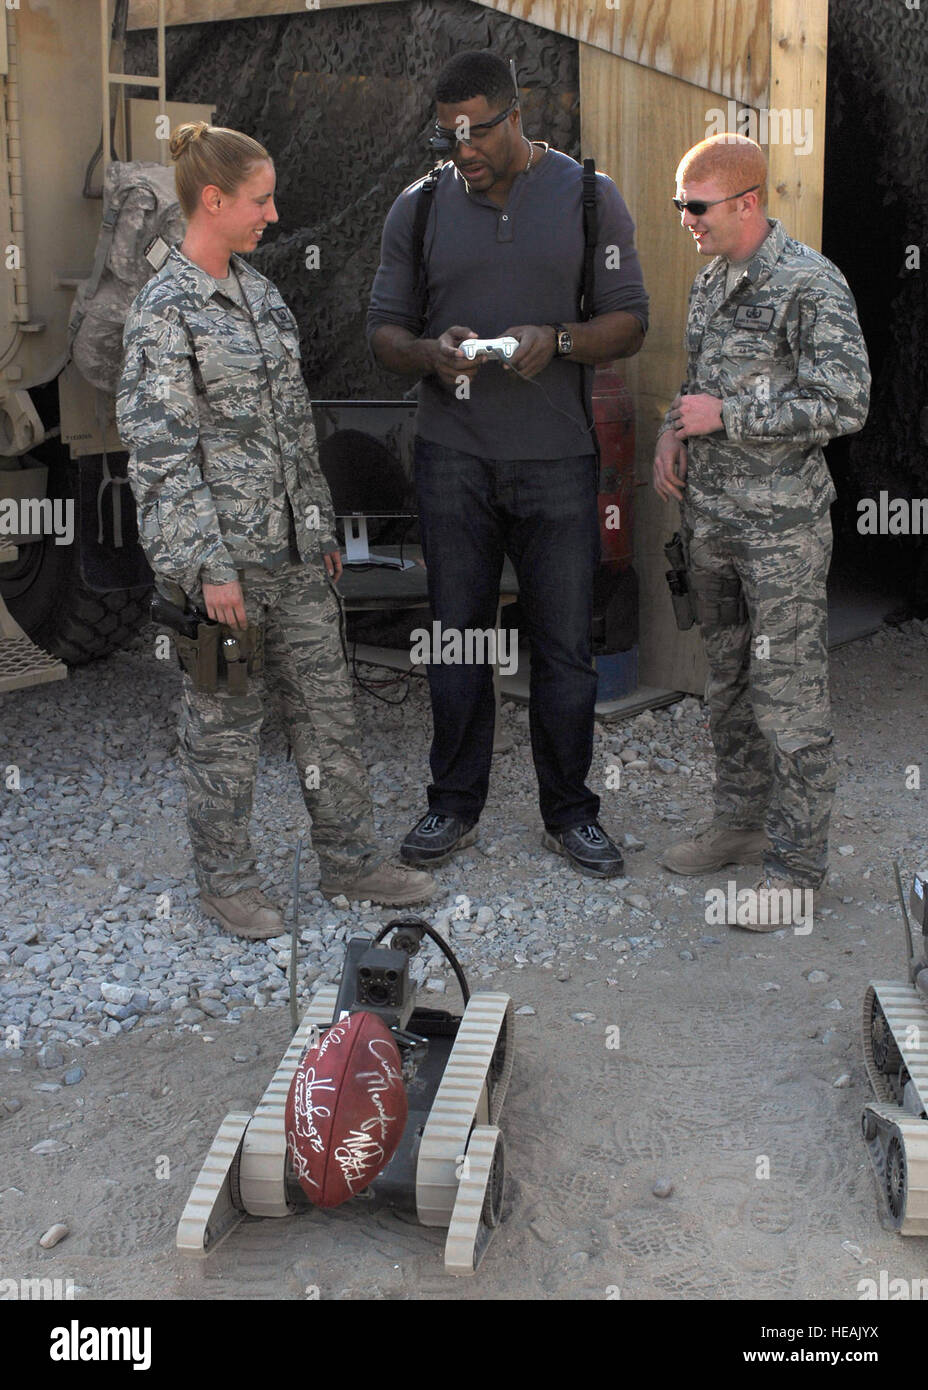 Fox NFL Sunday's Michael Strahan learns to operate an explosive ordnance disposal robot at Bagram Airfield, Afghanistan, Nov. 6, 2009, from Staff Sgt. Elizabeth Spradley (left) and Senior Airman James Dobrynski, both EOD technicians with the 755th Air Expeditionary Group, based at Bagram Airfield, Afghanistan.  The two EOD Airmen had Mr. Strahan practice picking up an autographed NFL football.  Sergeant Spradley is deployed from Spangdahlem Air Base, Germany. Airman Dobrynski is deployed from Luke Air Force Base, Ariz. The FOX NFL team is scheduled to broadcast live from here Nov. 8. The team  Stock Photo